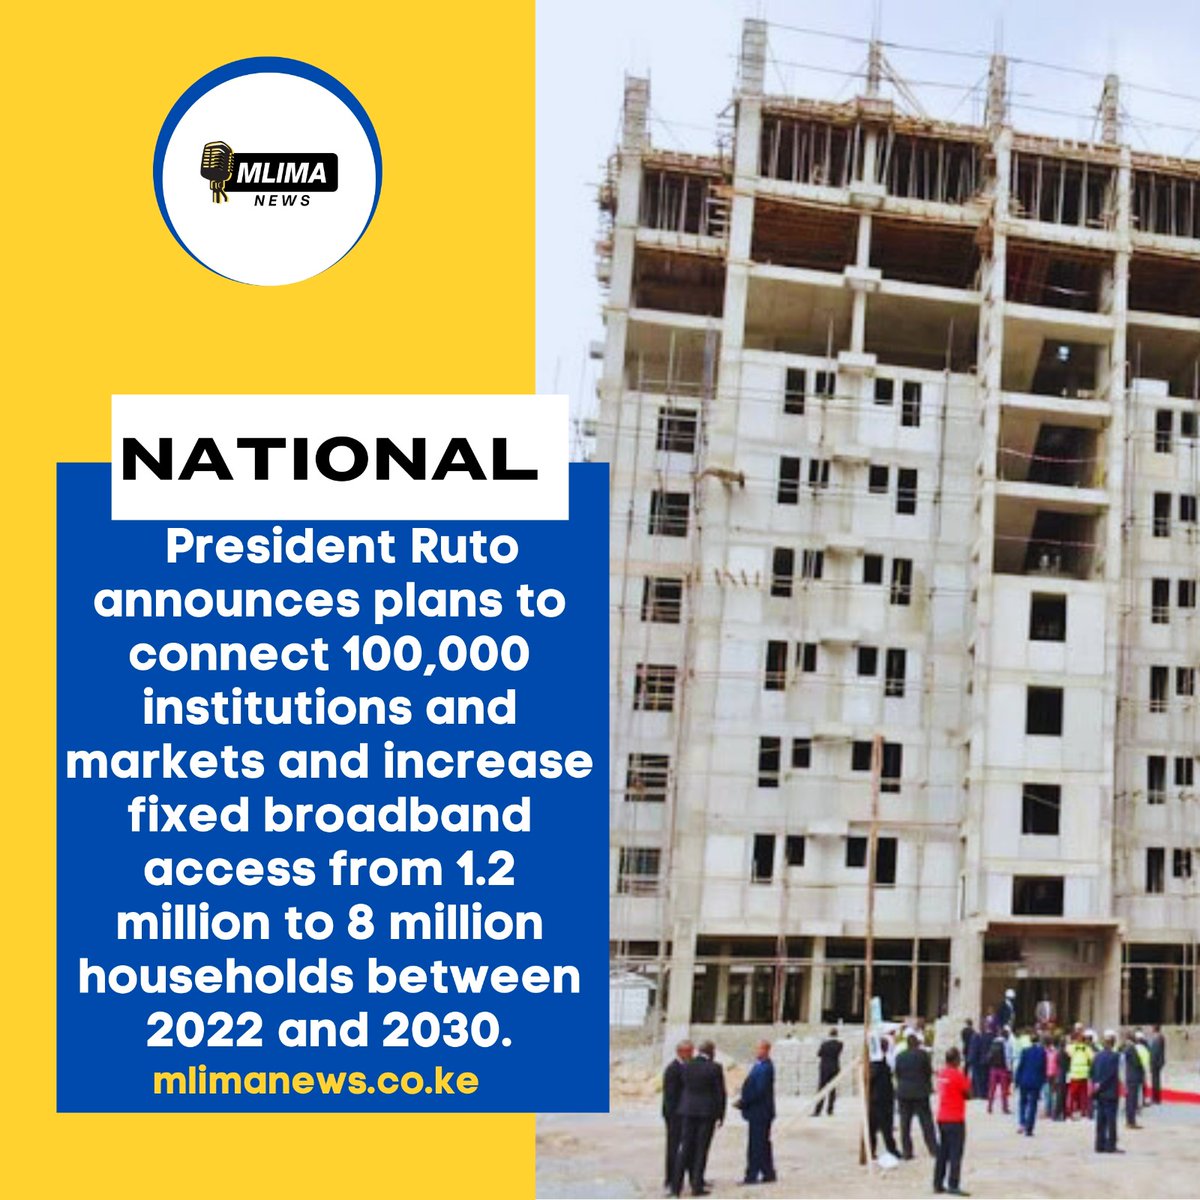 President Ruto announces plans to connect 100,000 institutions and markets and increase fixed broadbandaccess from 1.2 million to 8 million households
#RutoEmpowers #KenyaKwanzaDelivers